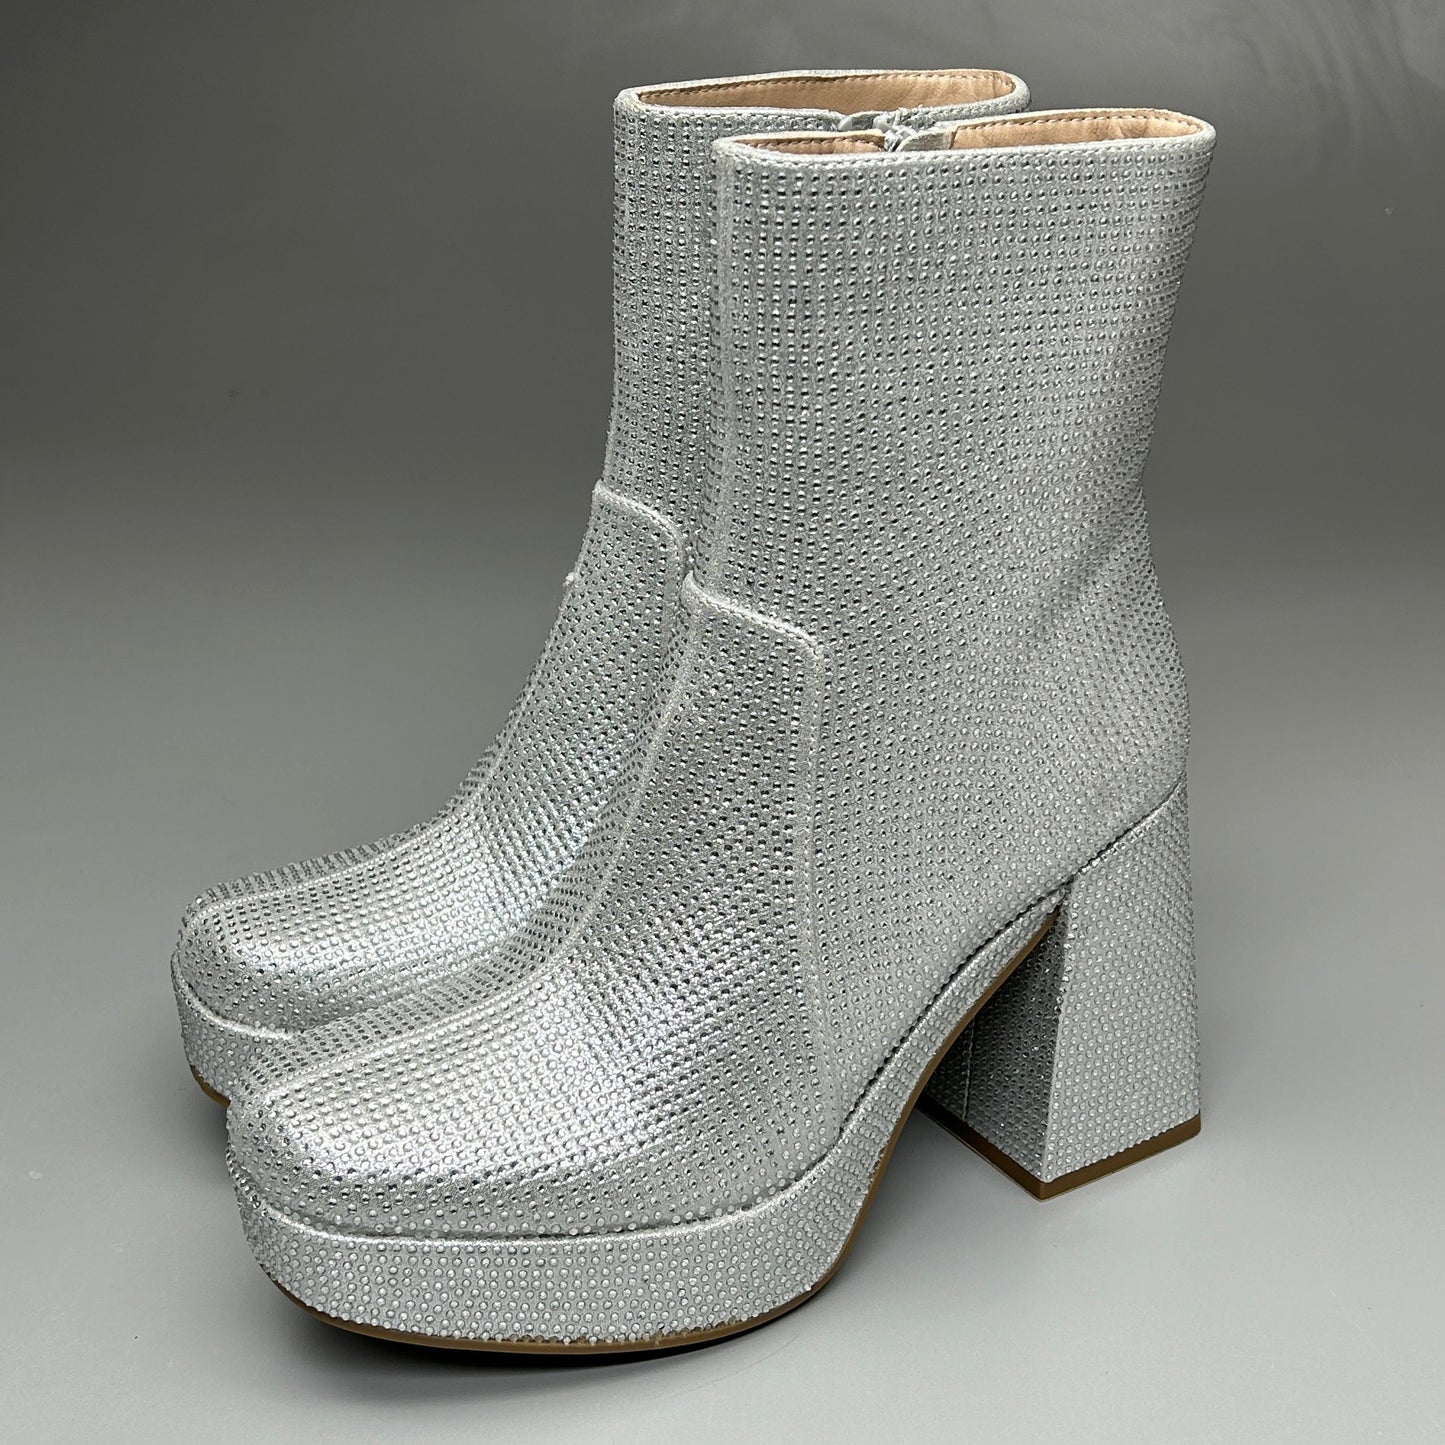 MIA Iva Silver Stone Heeled Boots Women's Sz 10 Silver GS1253108 (New)